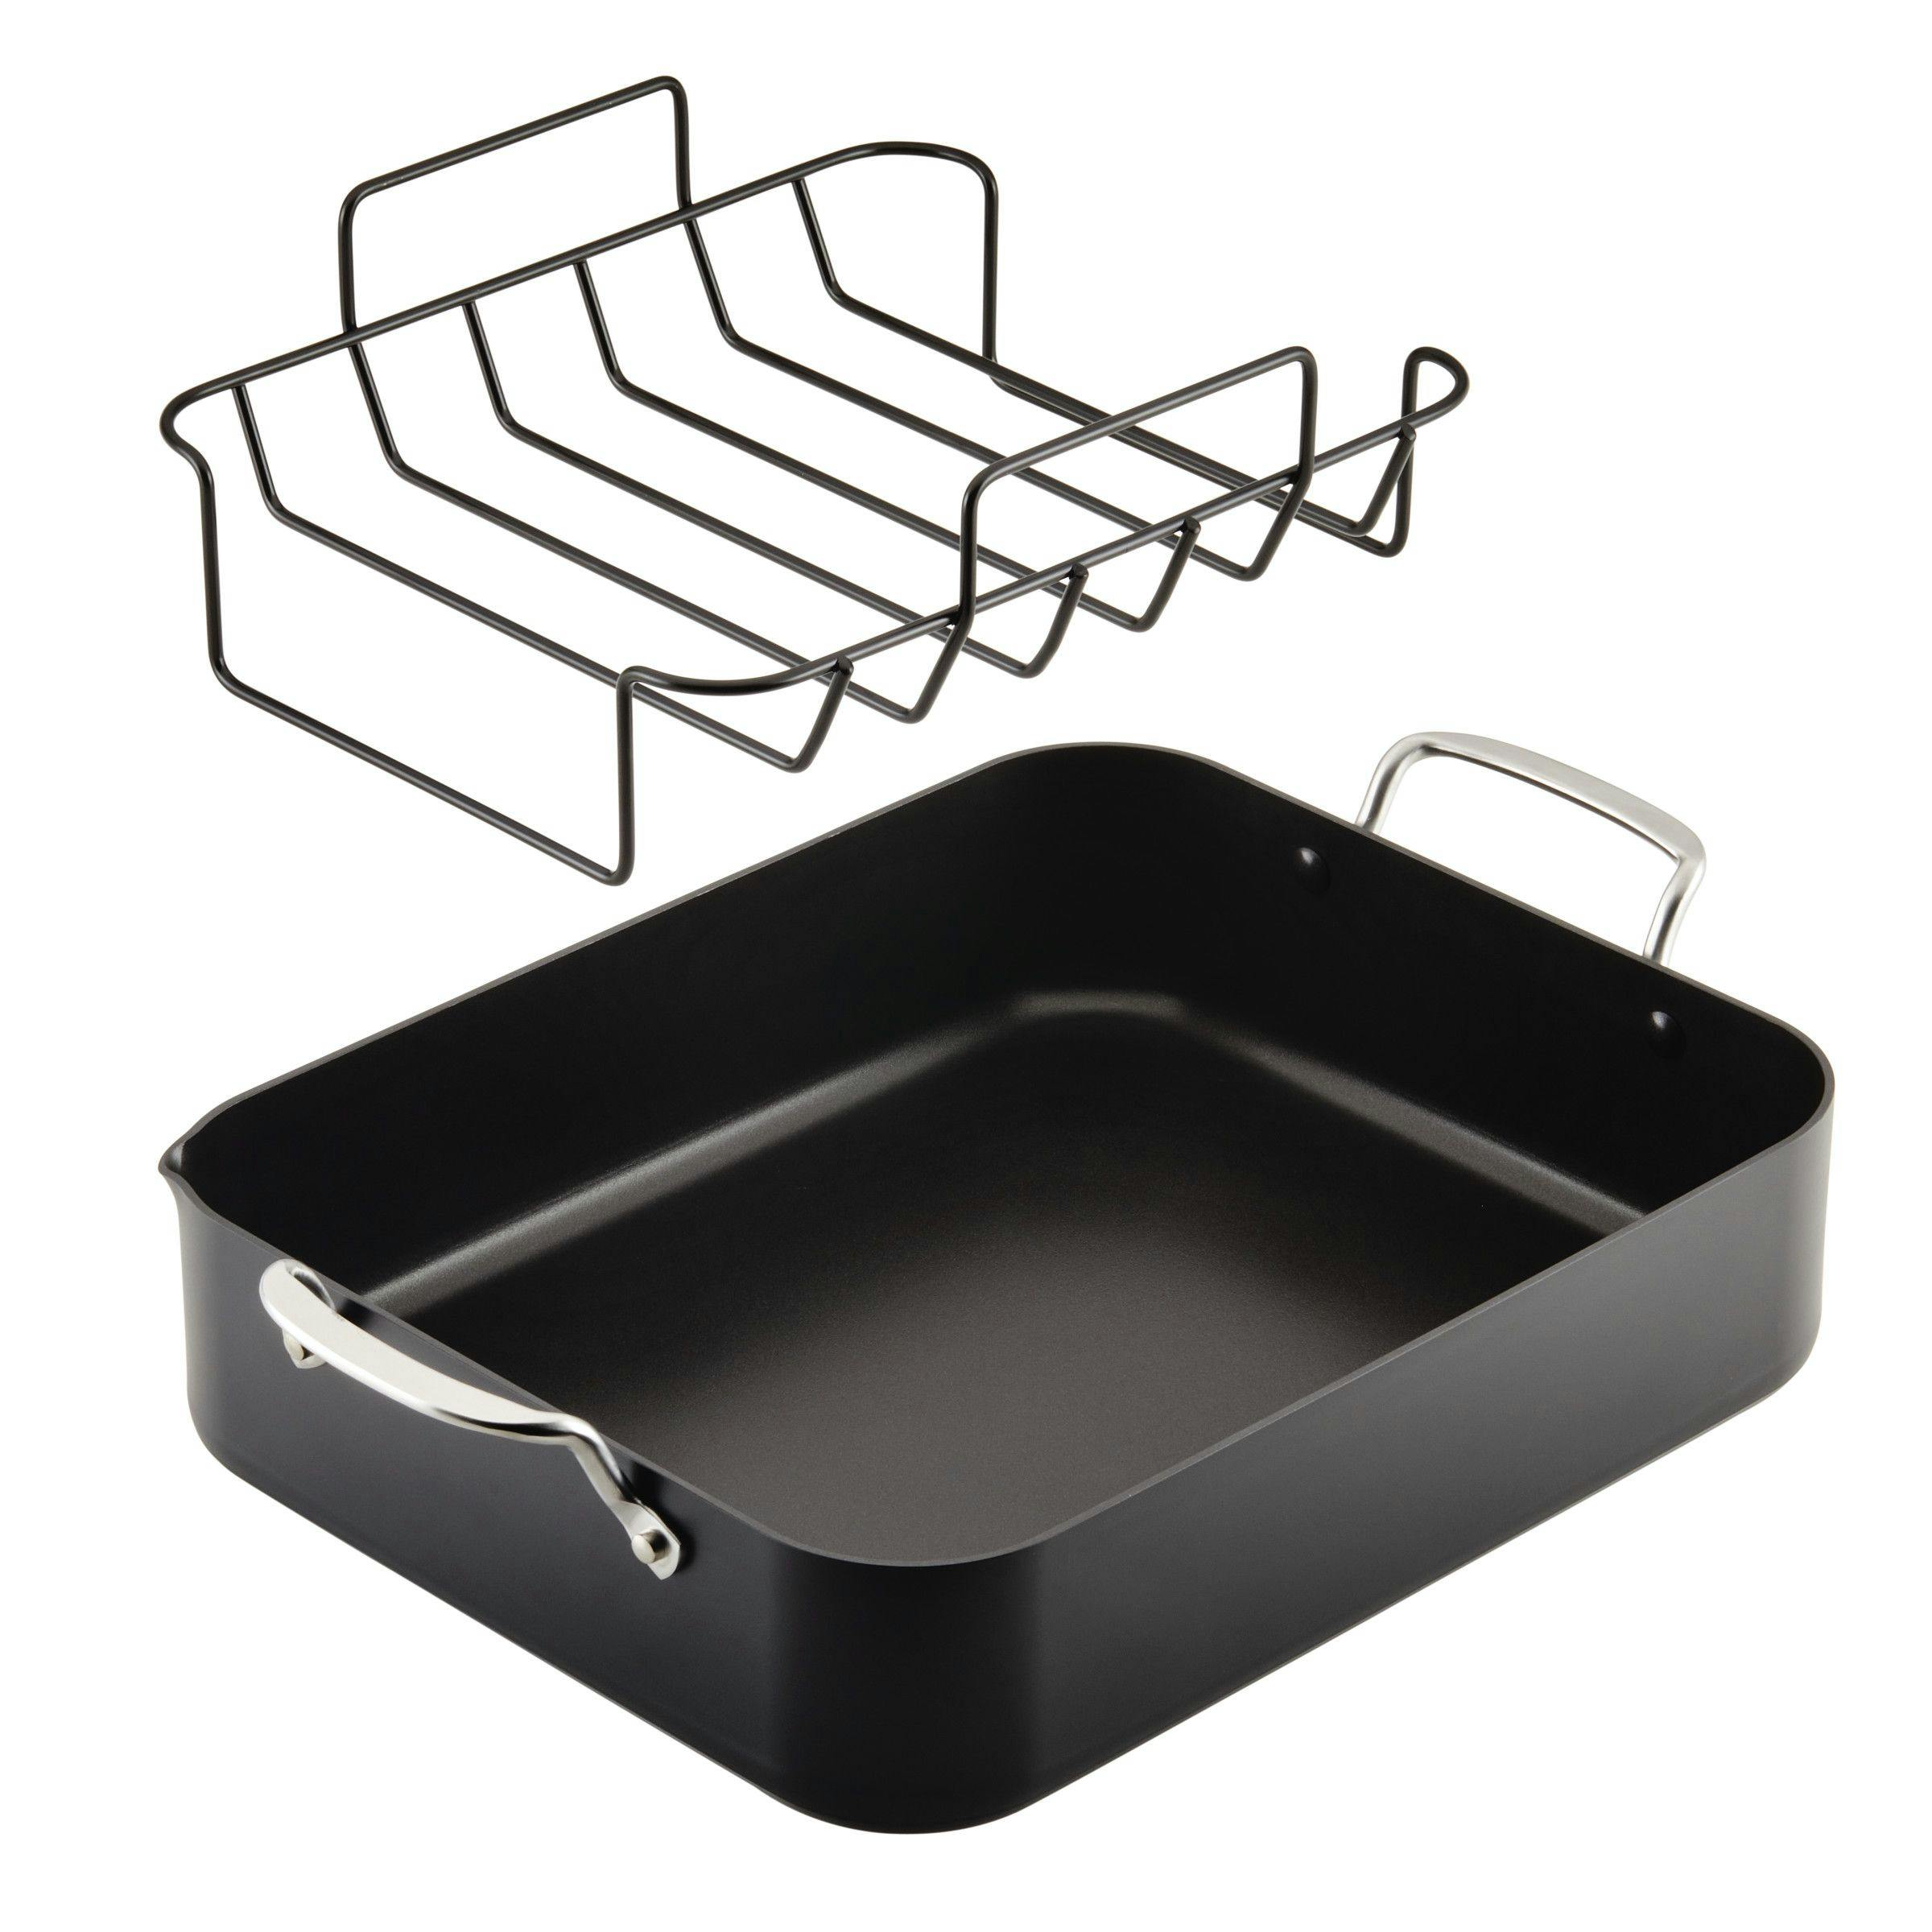 KitchenAid Hard Anodized Roaster with Removable Nonstick Rack, 13-Inch x 15.75-Inch, Matte Black